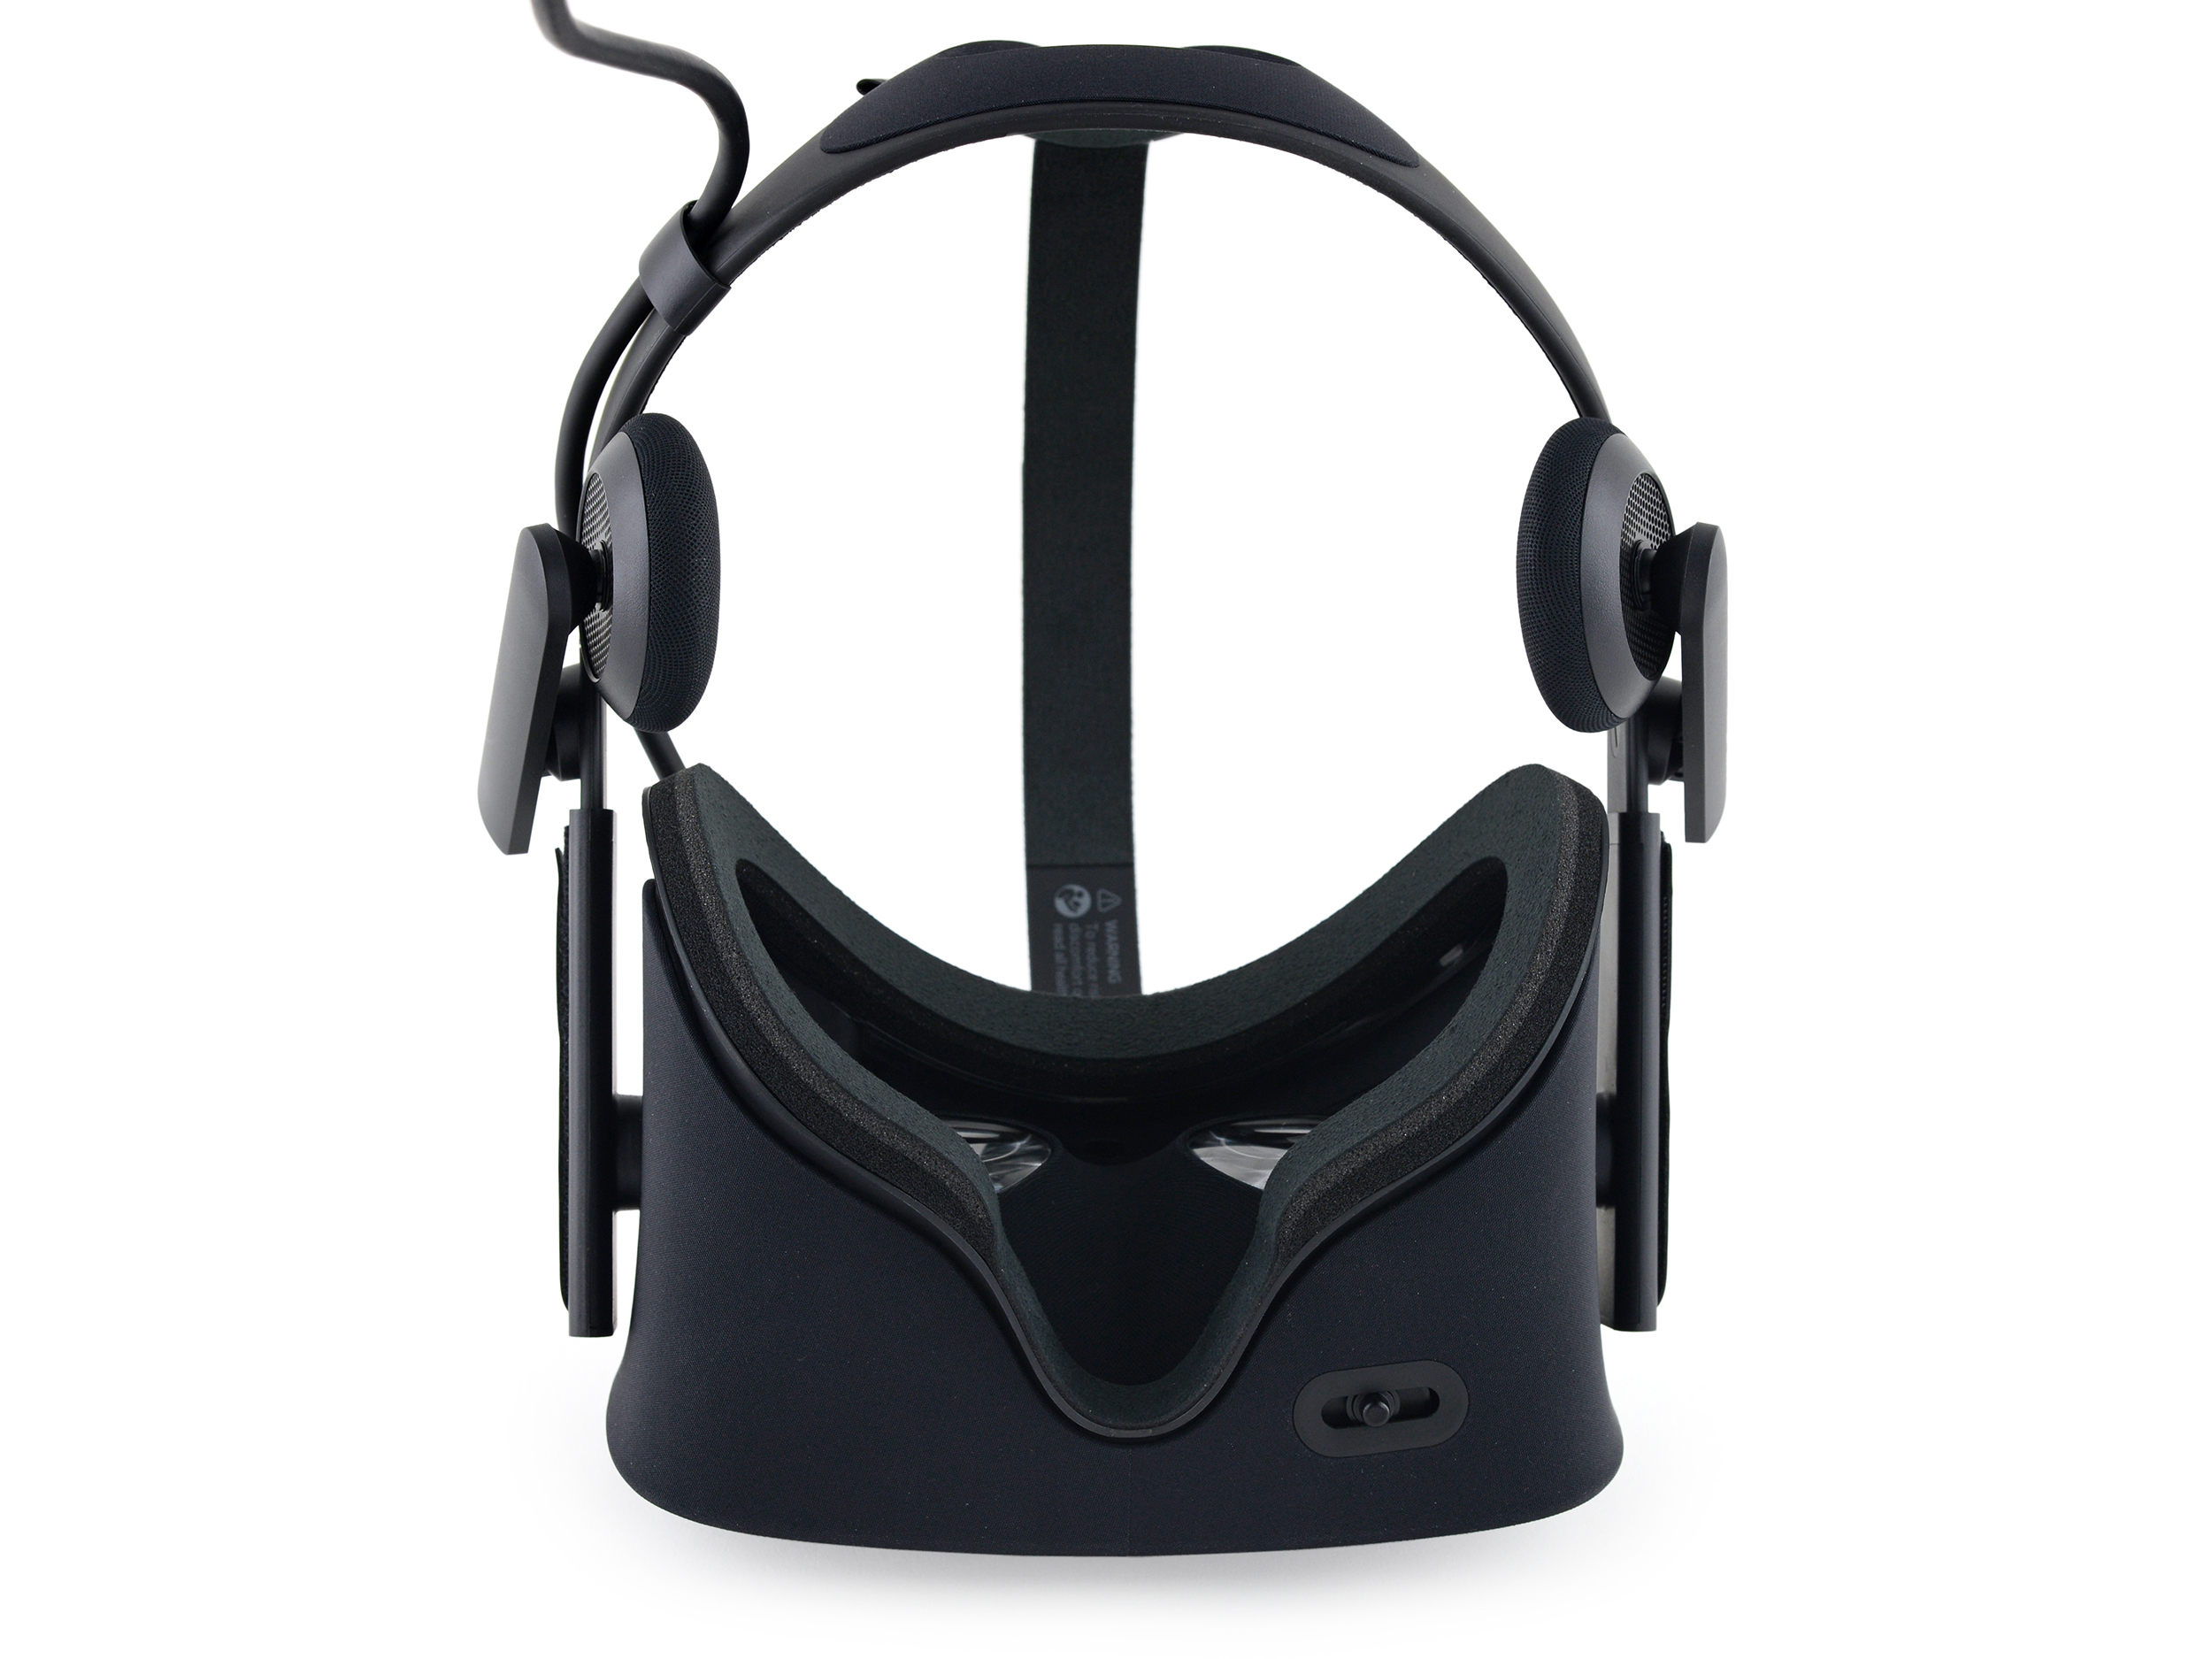 See What's Inside the Oculus Rift | Time